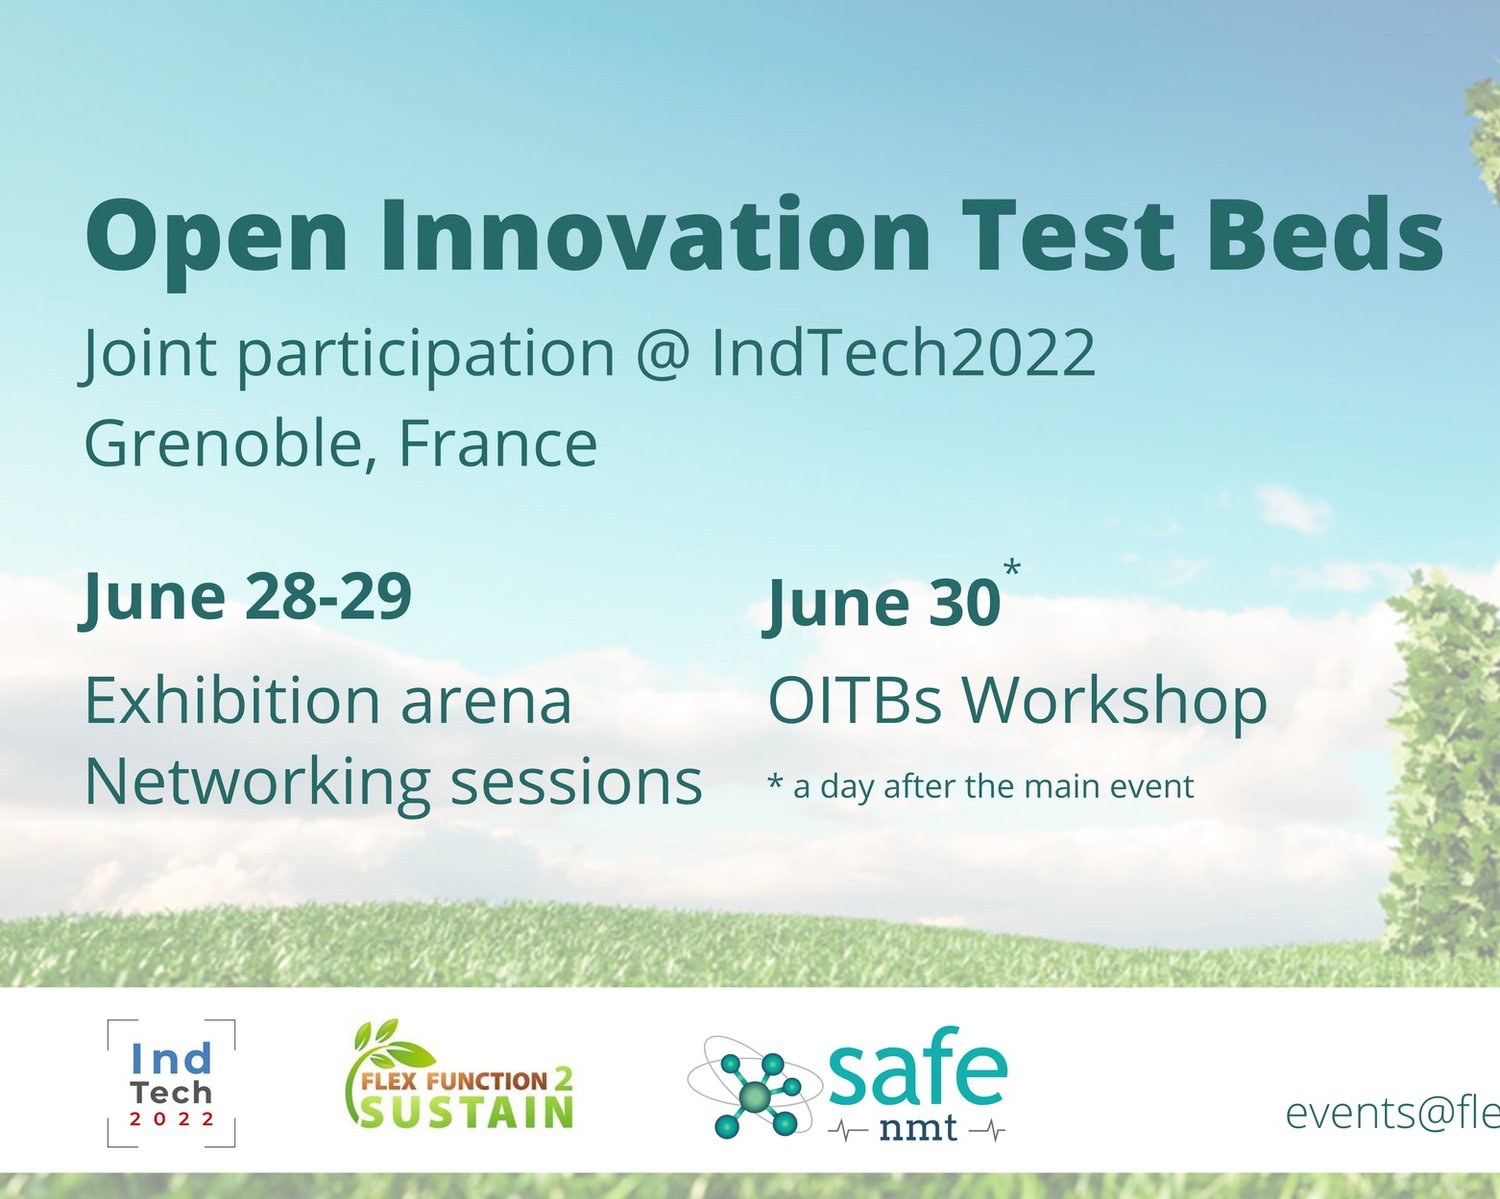 INL, member of flexfunction2sustain and safe-n-medtech, co-organizes OITB Village at IndTech2022